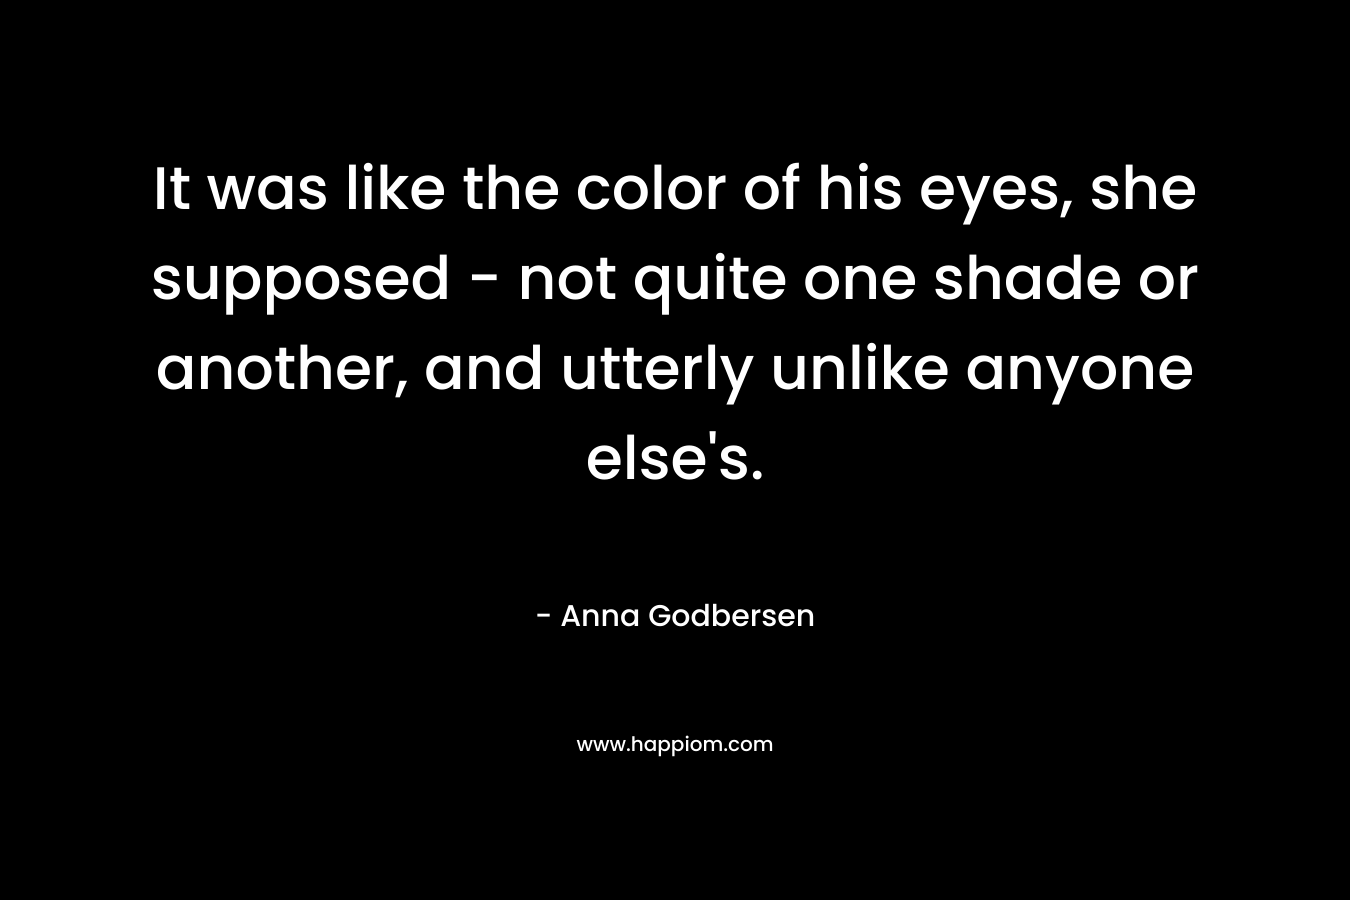 It was like the color of his eyes, she supposed - not quite one shade or another, and utterly unlike anyone else's.